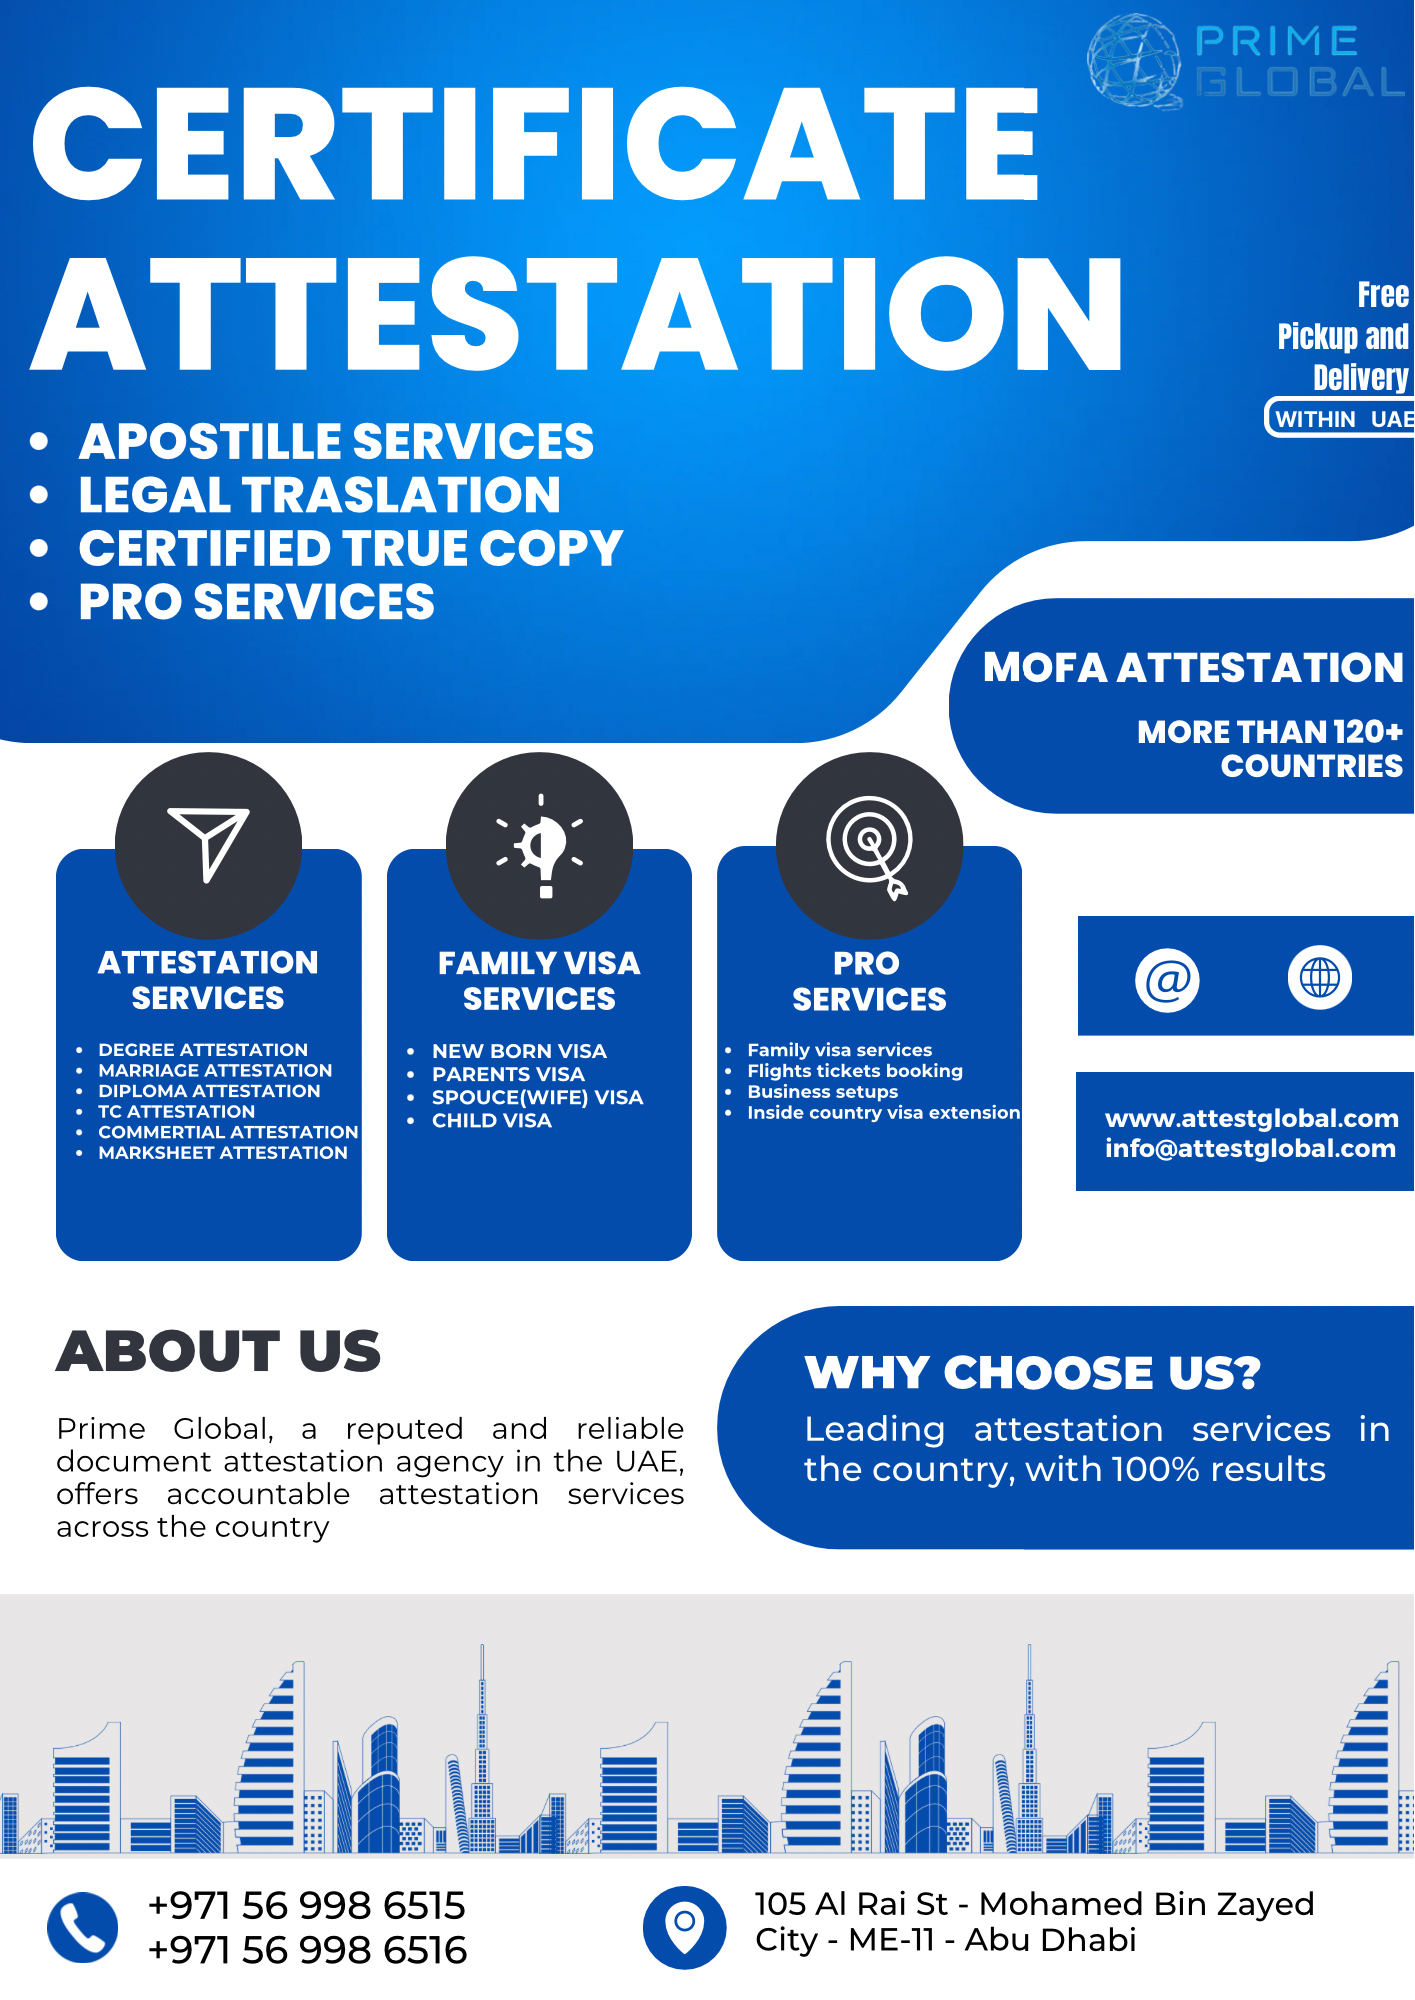 Affordable Certificate Attestation Services in the Abu Dhabi, Dubai and UAE